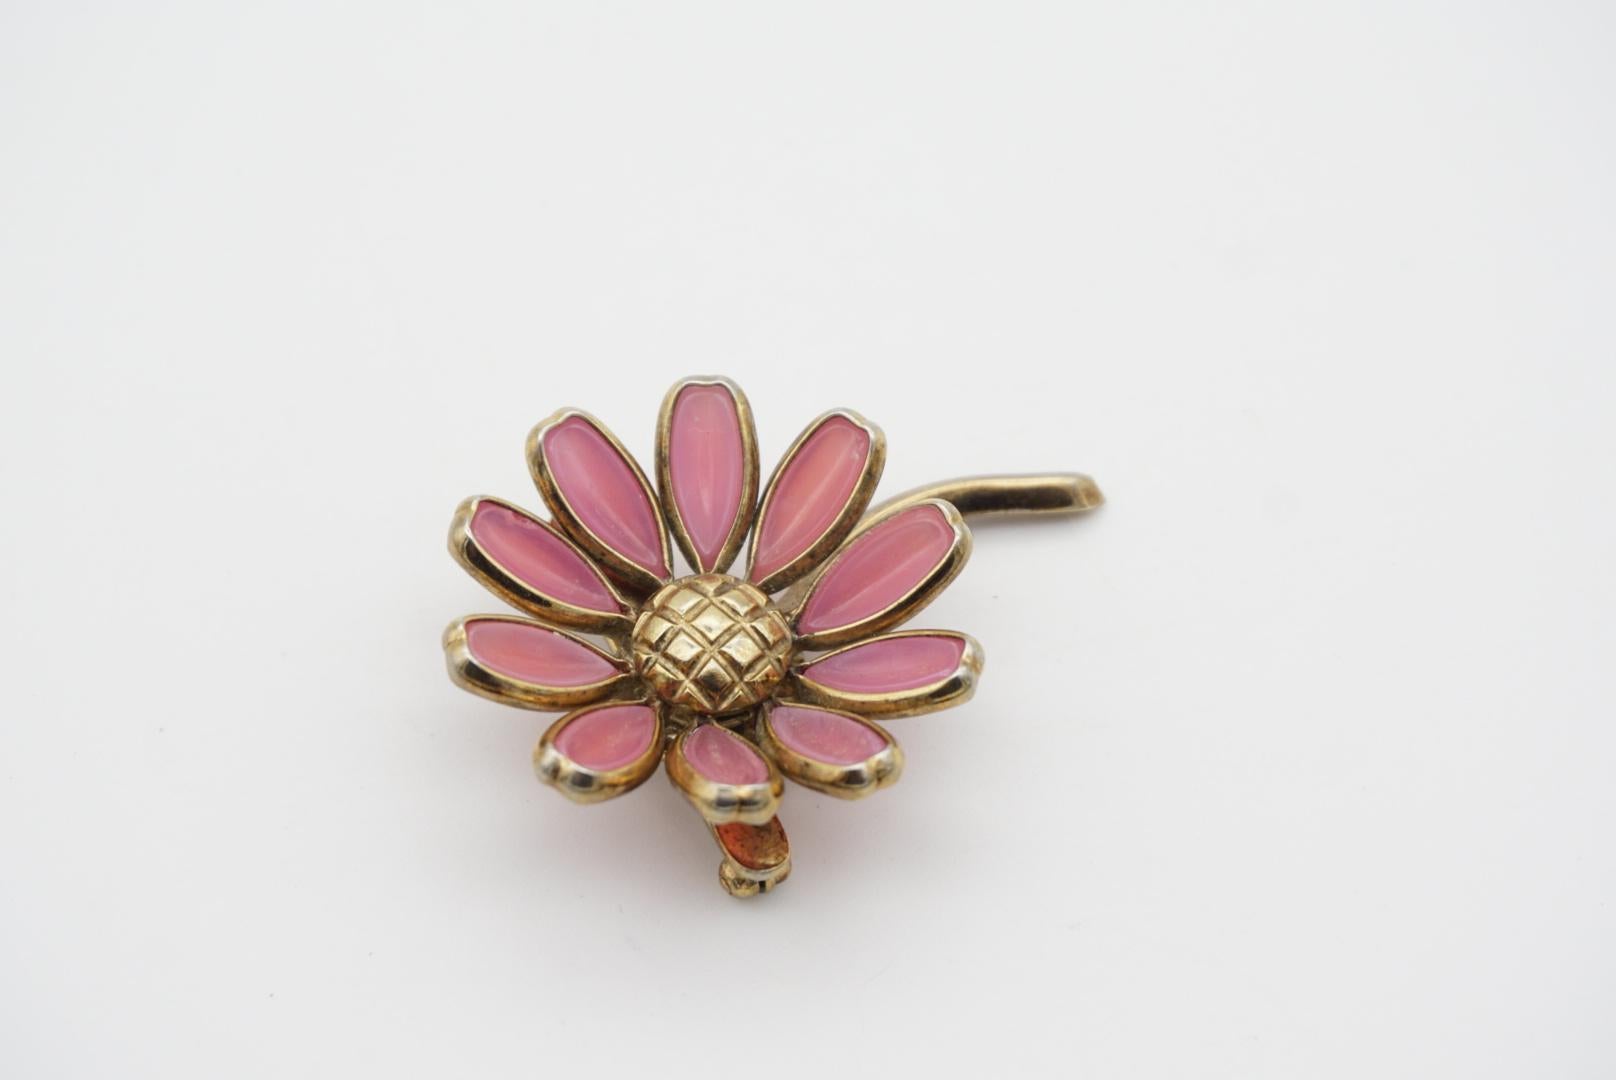 Crown Trifari Vintage 1950s Pale Pink Flower Daisy Glass Enamel Retro Brooch In Excellent Condition For Sale In Wokingham, England